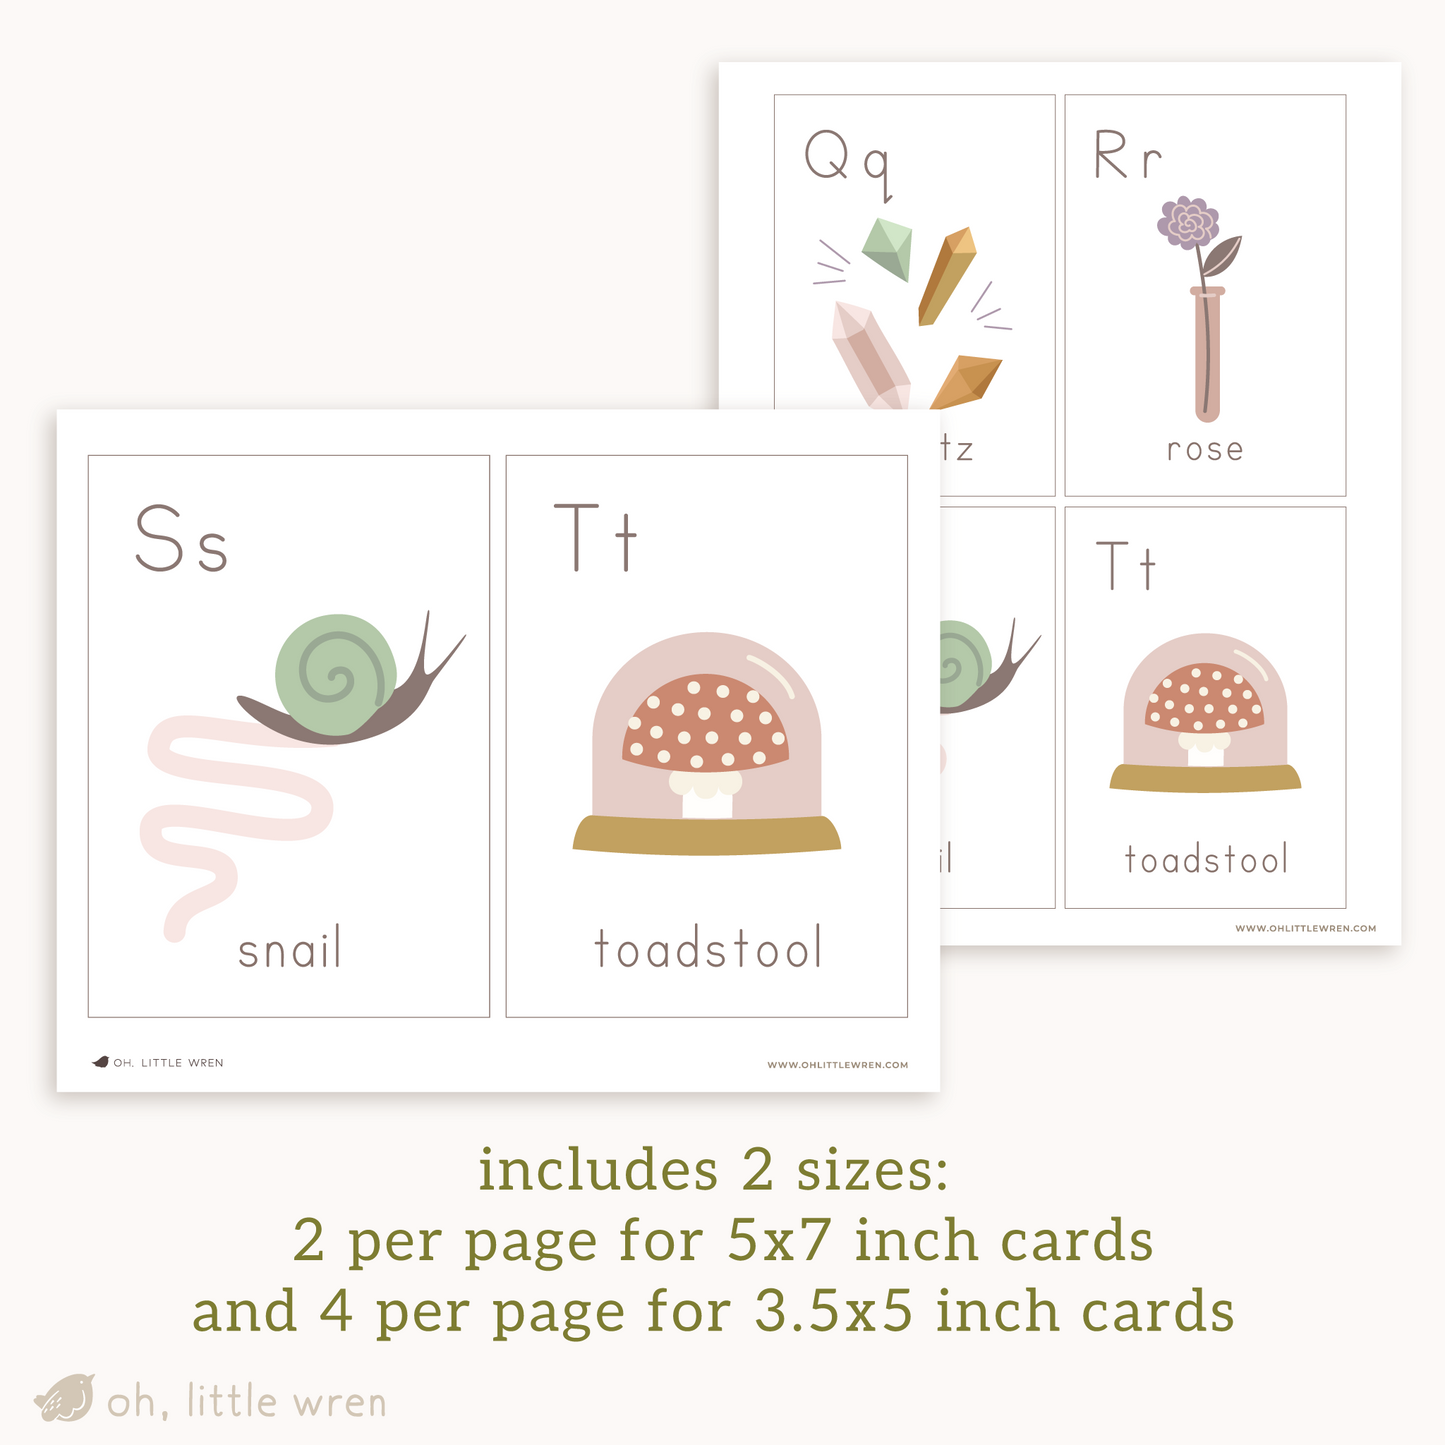 two pages are shown. of the left, two larger cards with s for snail and t for toadstool. on the right 4 smaller. text reads includes 2 sizes: 2 per page for 5x7 inch cards and 4 per page for 3.5x5 inch cards